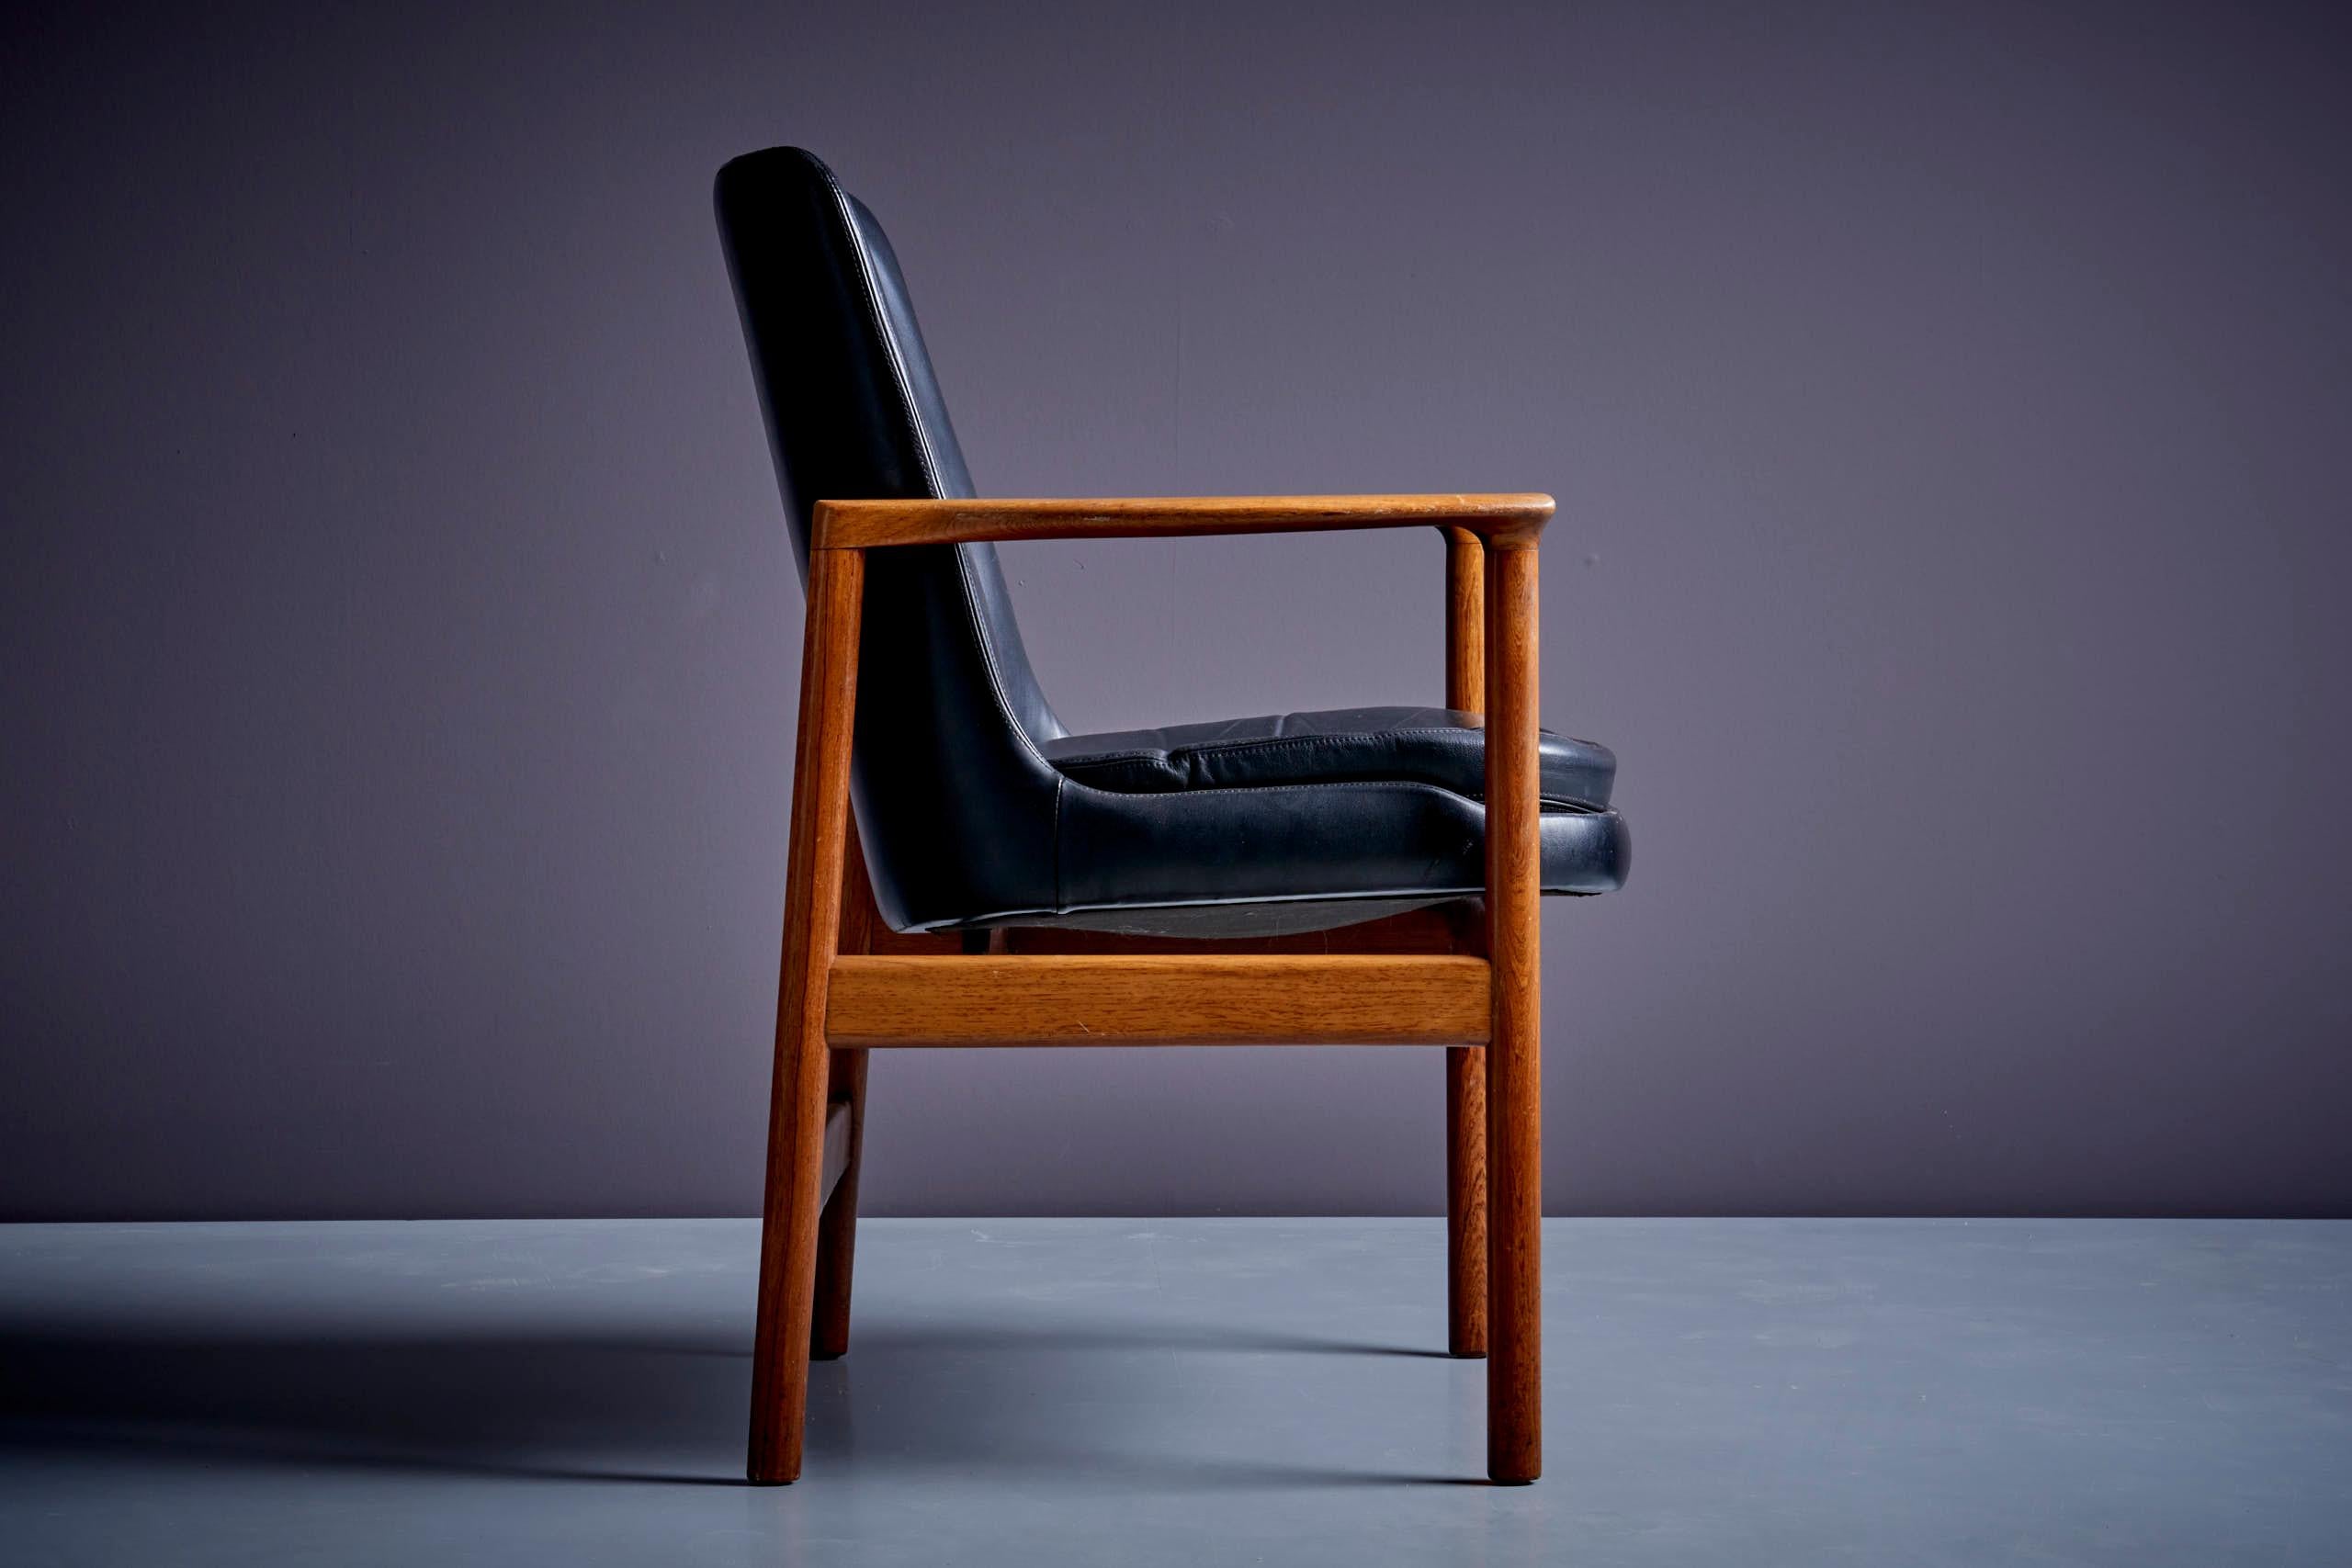 Mid-20th Century Ib Kofod-Larsen Arm or Easy Chair for Fröscher Sitform, Germany 1960s